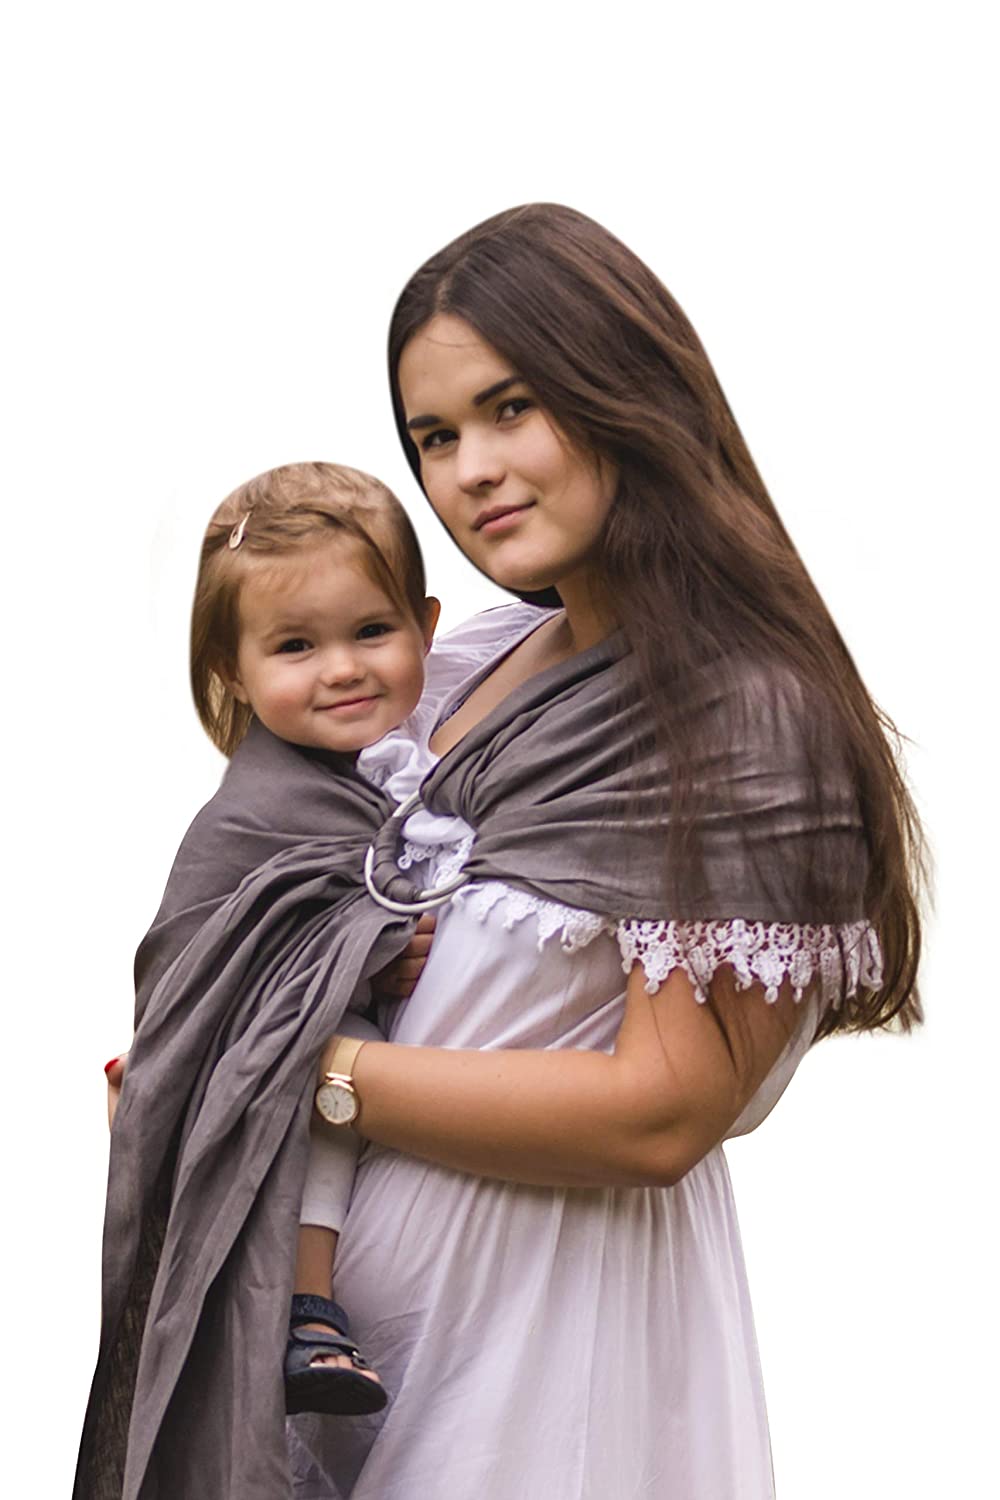 Joy and Joe 2m x 0.7m Lightweight Breathable Woven Canvas Baby Ring Sling Made in the UK with Integrated Pouch and Coloured Instruction Book